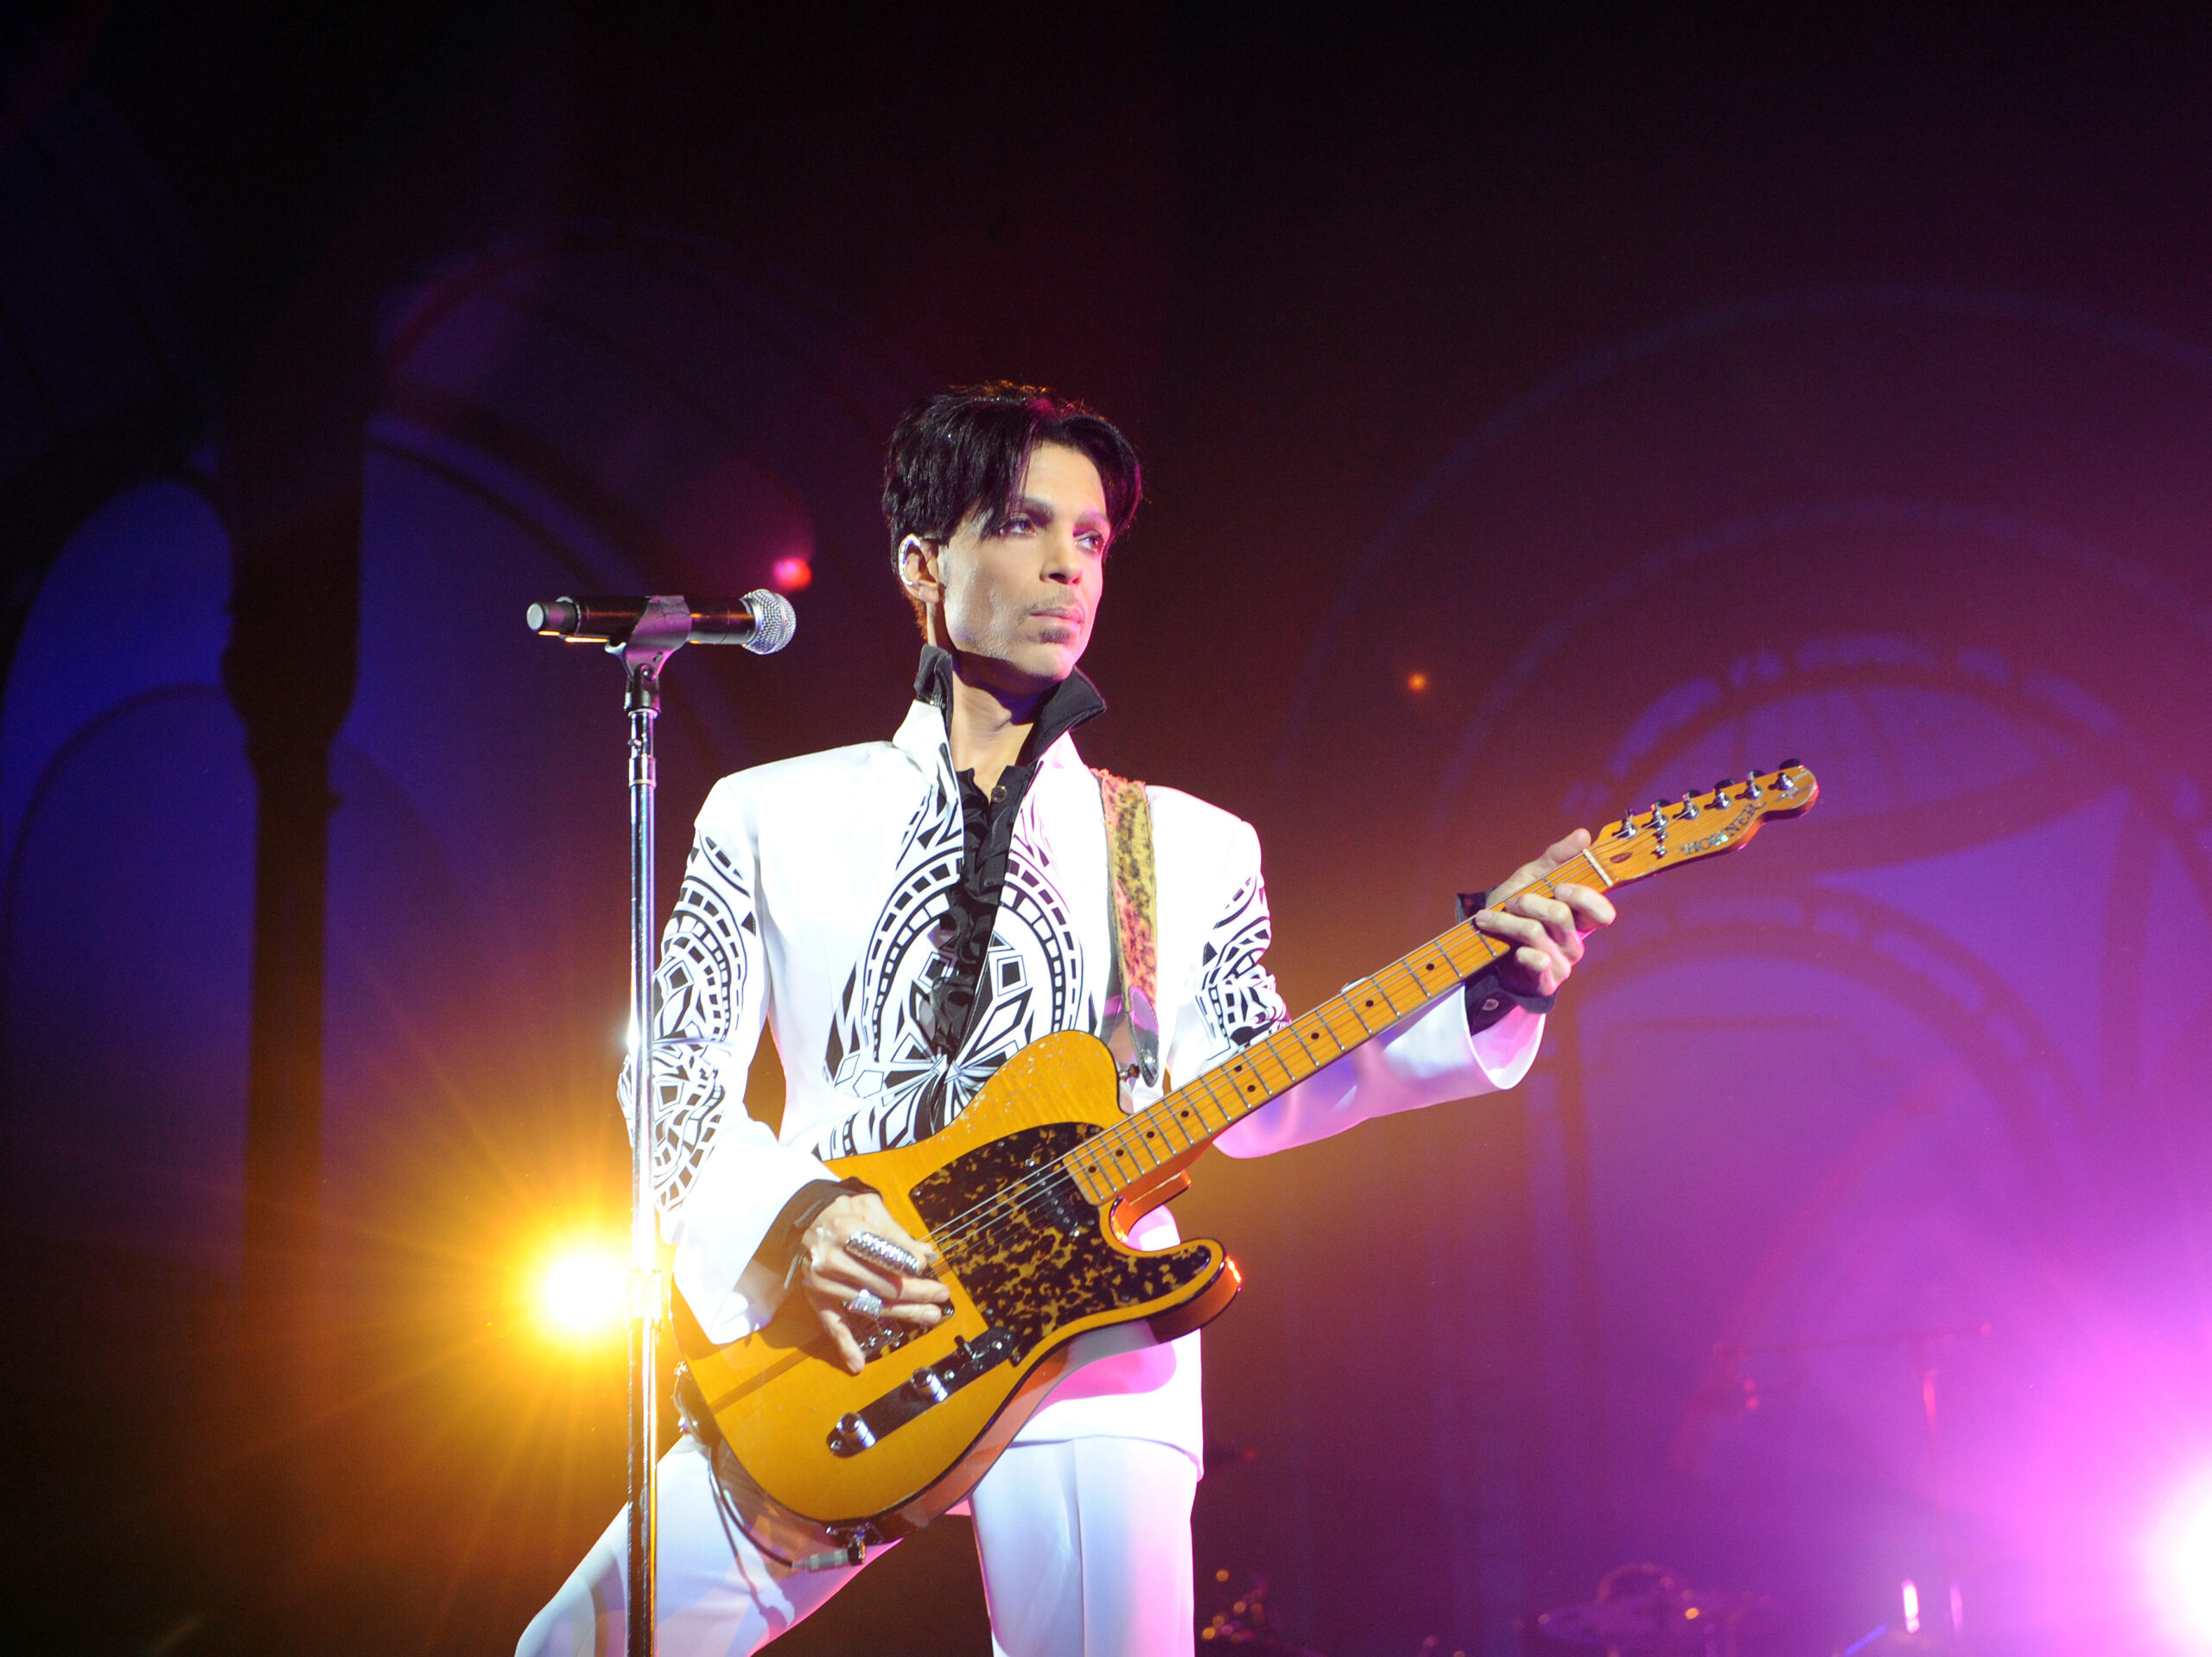 Featured image for “Lawmakers are considering awarding Prince a Congressional Gold Medal”